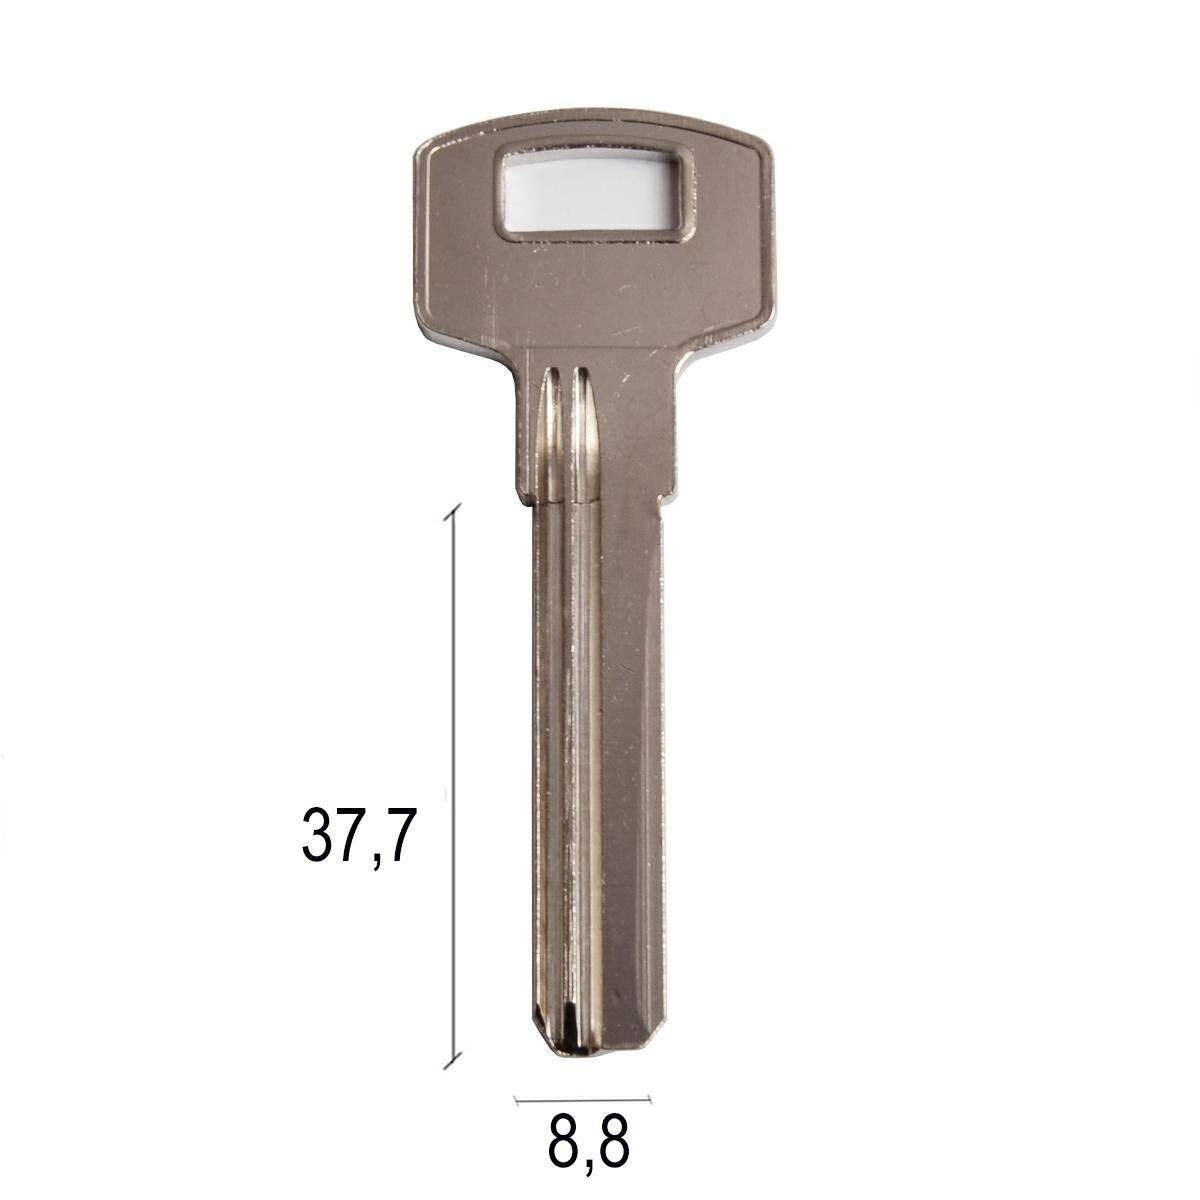 Chinese drilled key 2